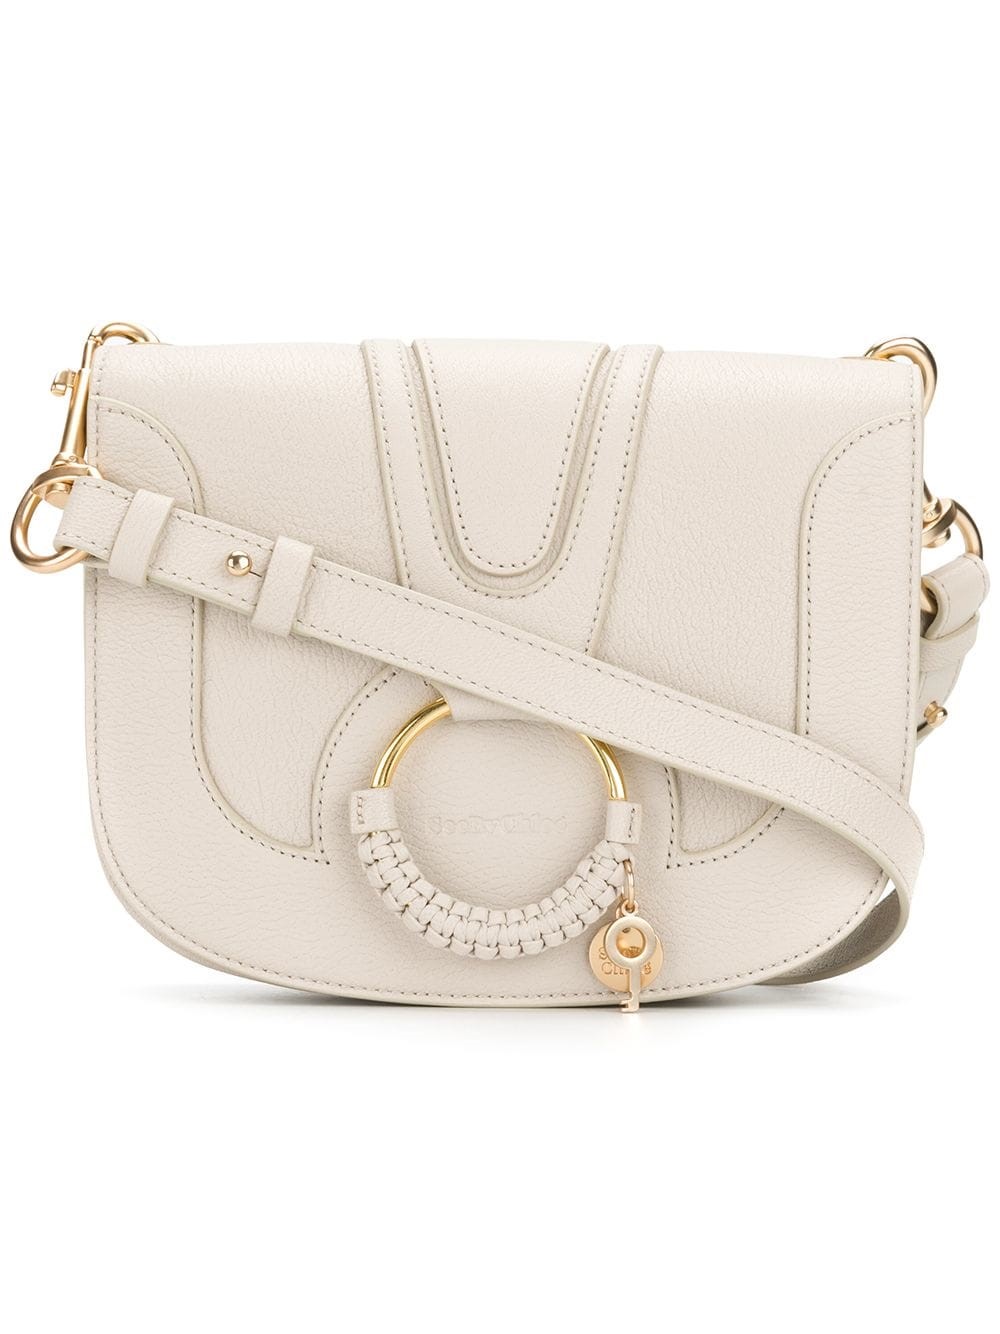 see by chloe` CROSS BODY BAG available on montiboutique.com - 26334